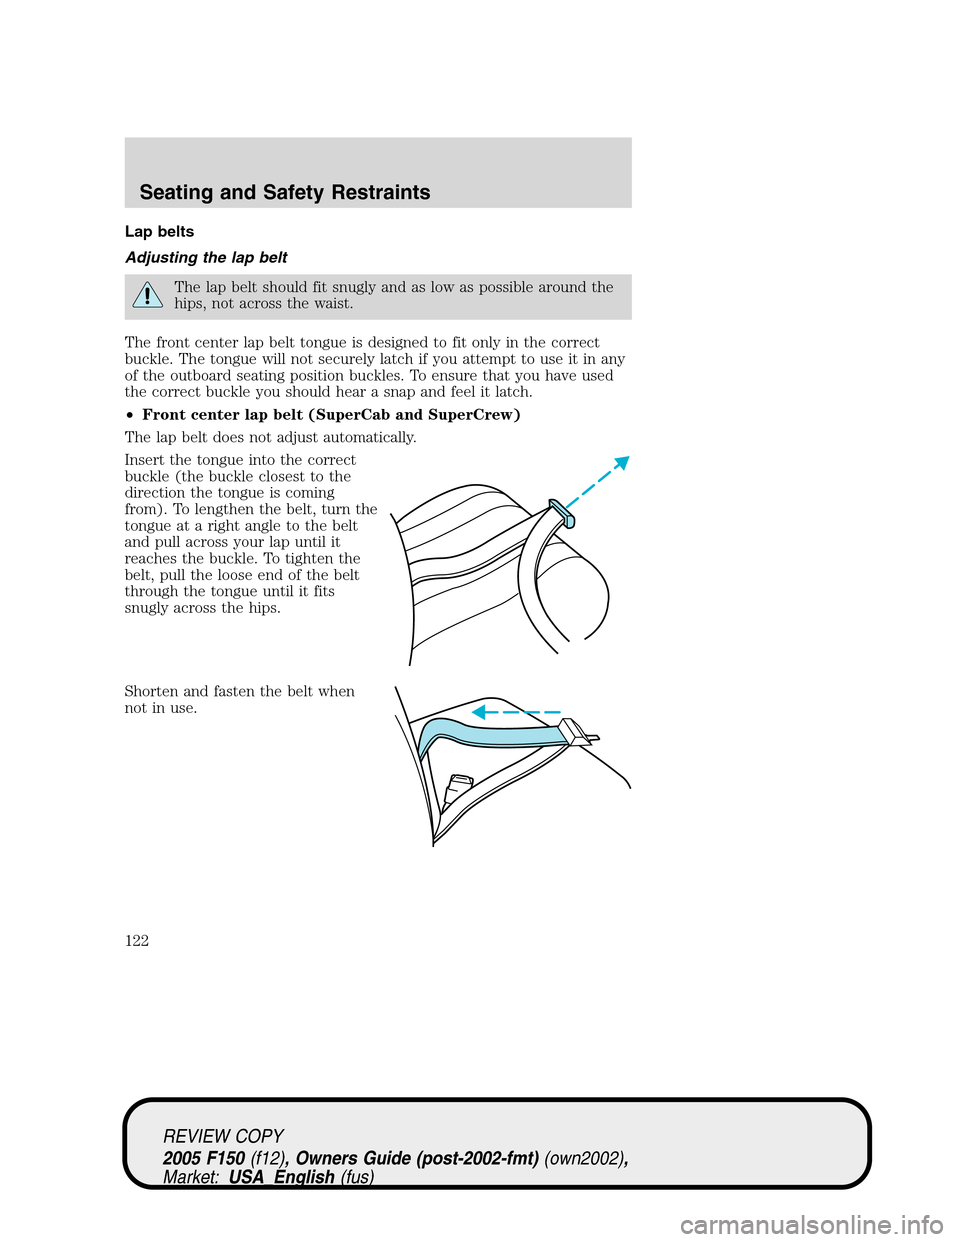 FORD F150 2005 11.G Owners Manual Lap belts
Adjusting the lap belt
The lap belt should fit snugly and as low as possible around the
hips, not across the waist.
The front center lap belt tongue is designed to fit only in the correct
bu